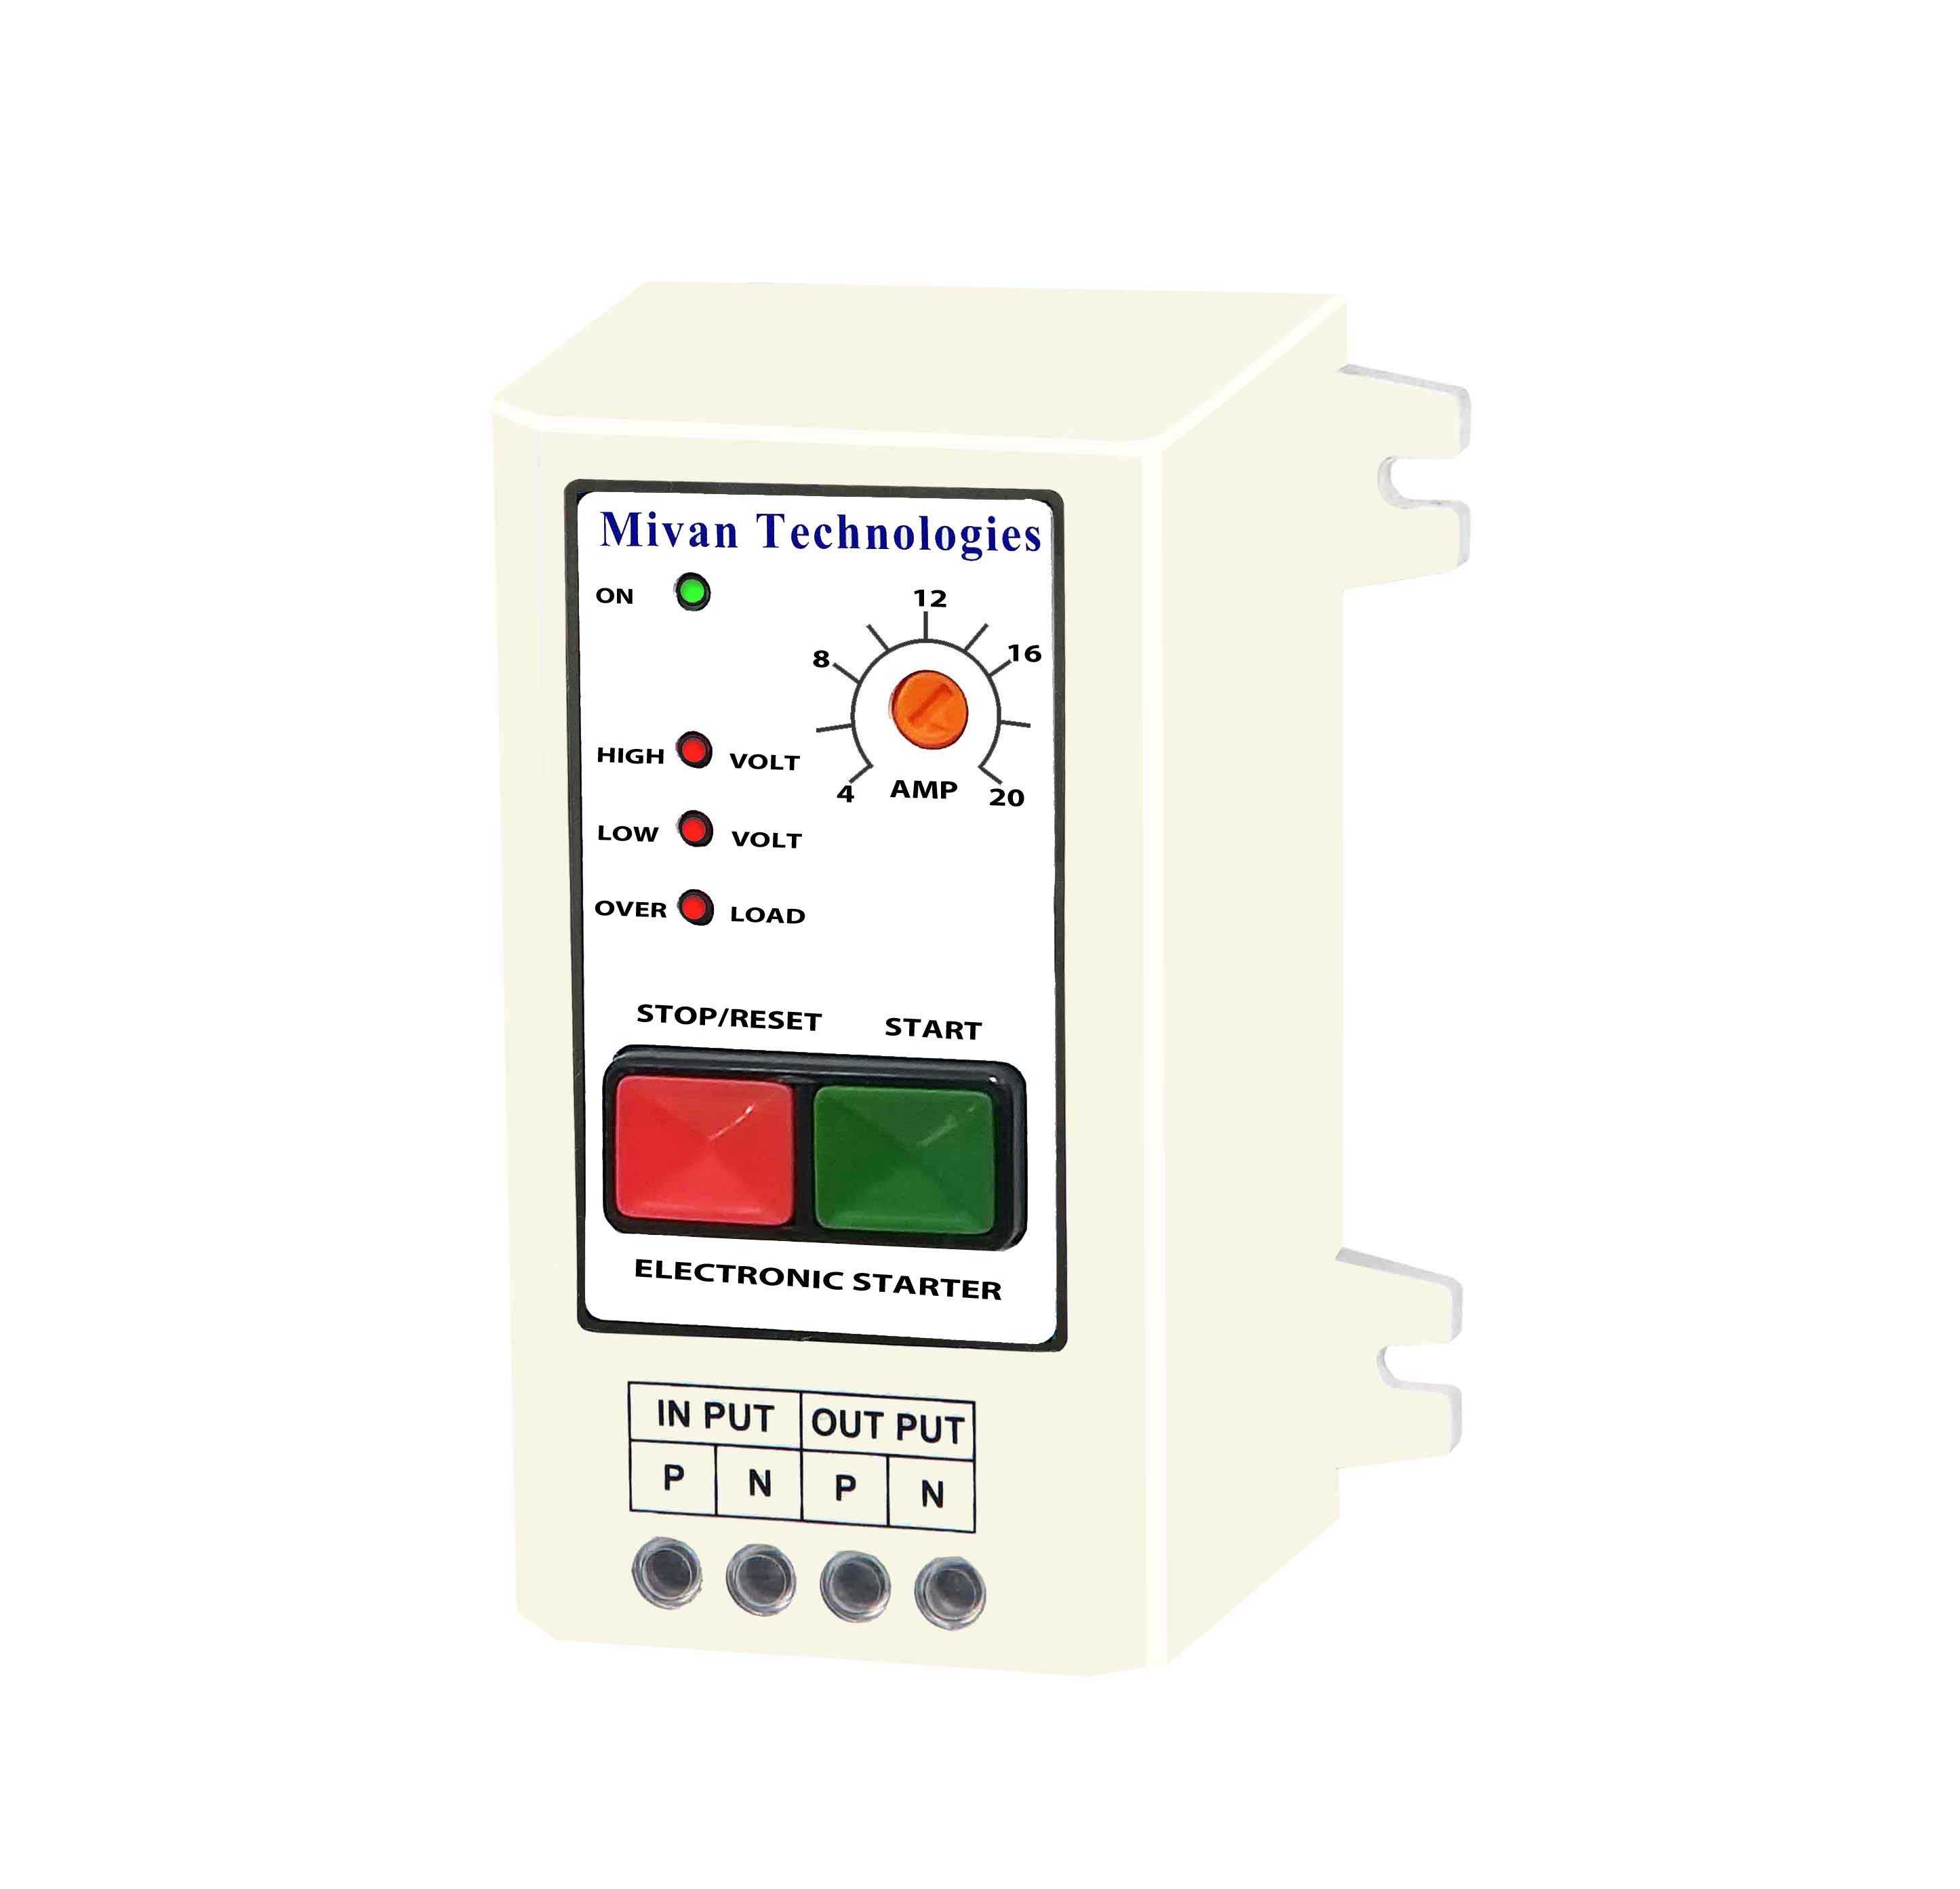 ES Single Phase Electronic starter for motor with HV LV & OL protection suitable for all single phase appliances